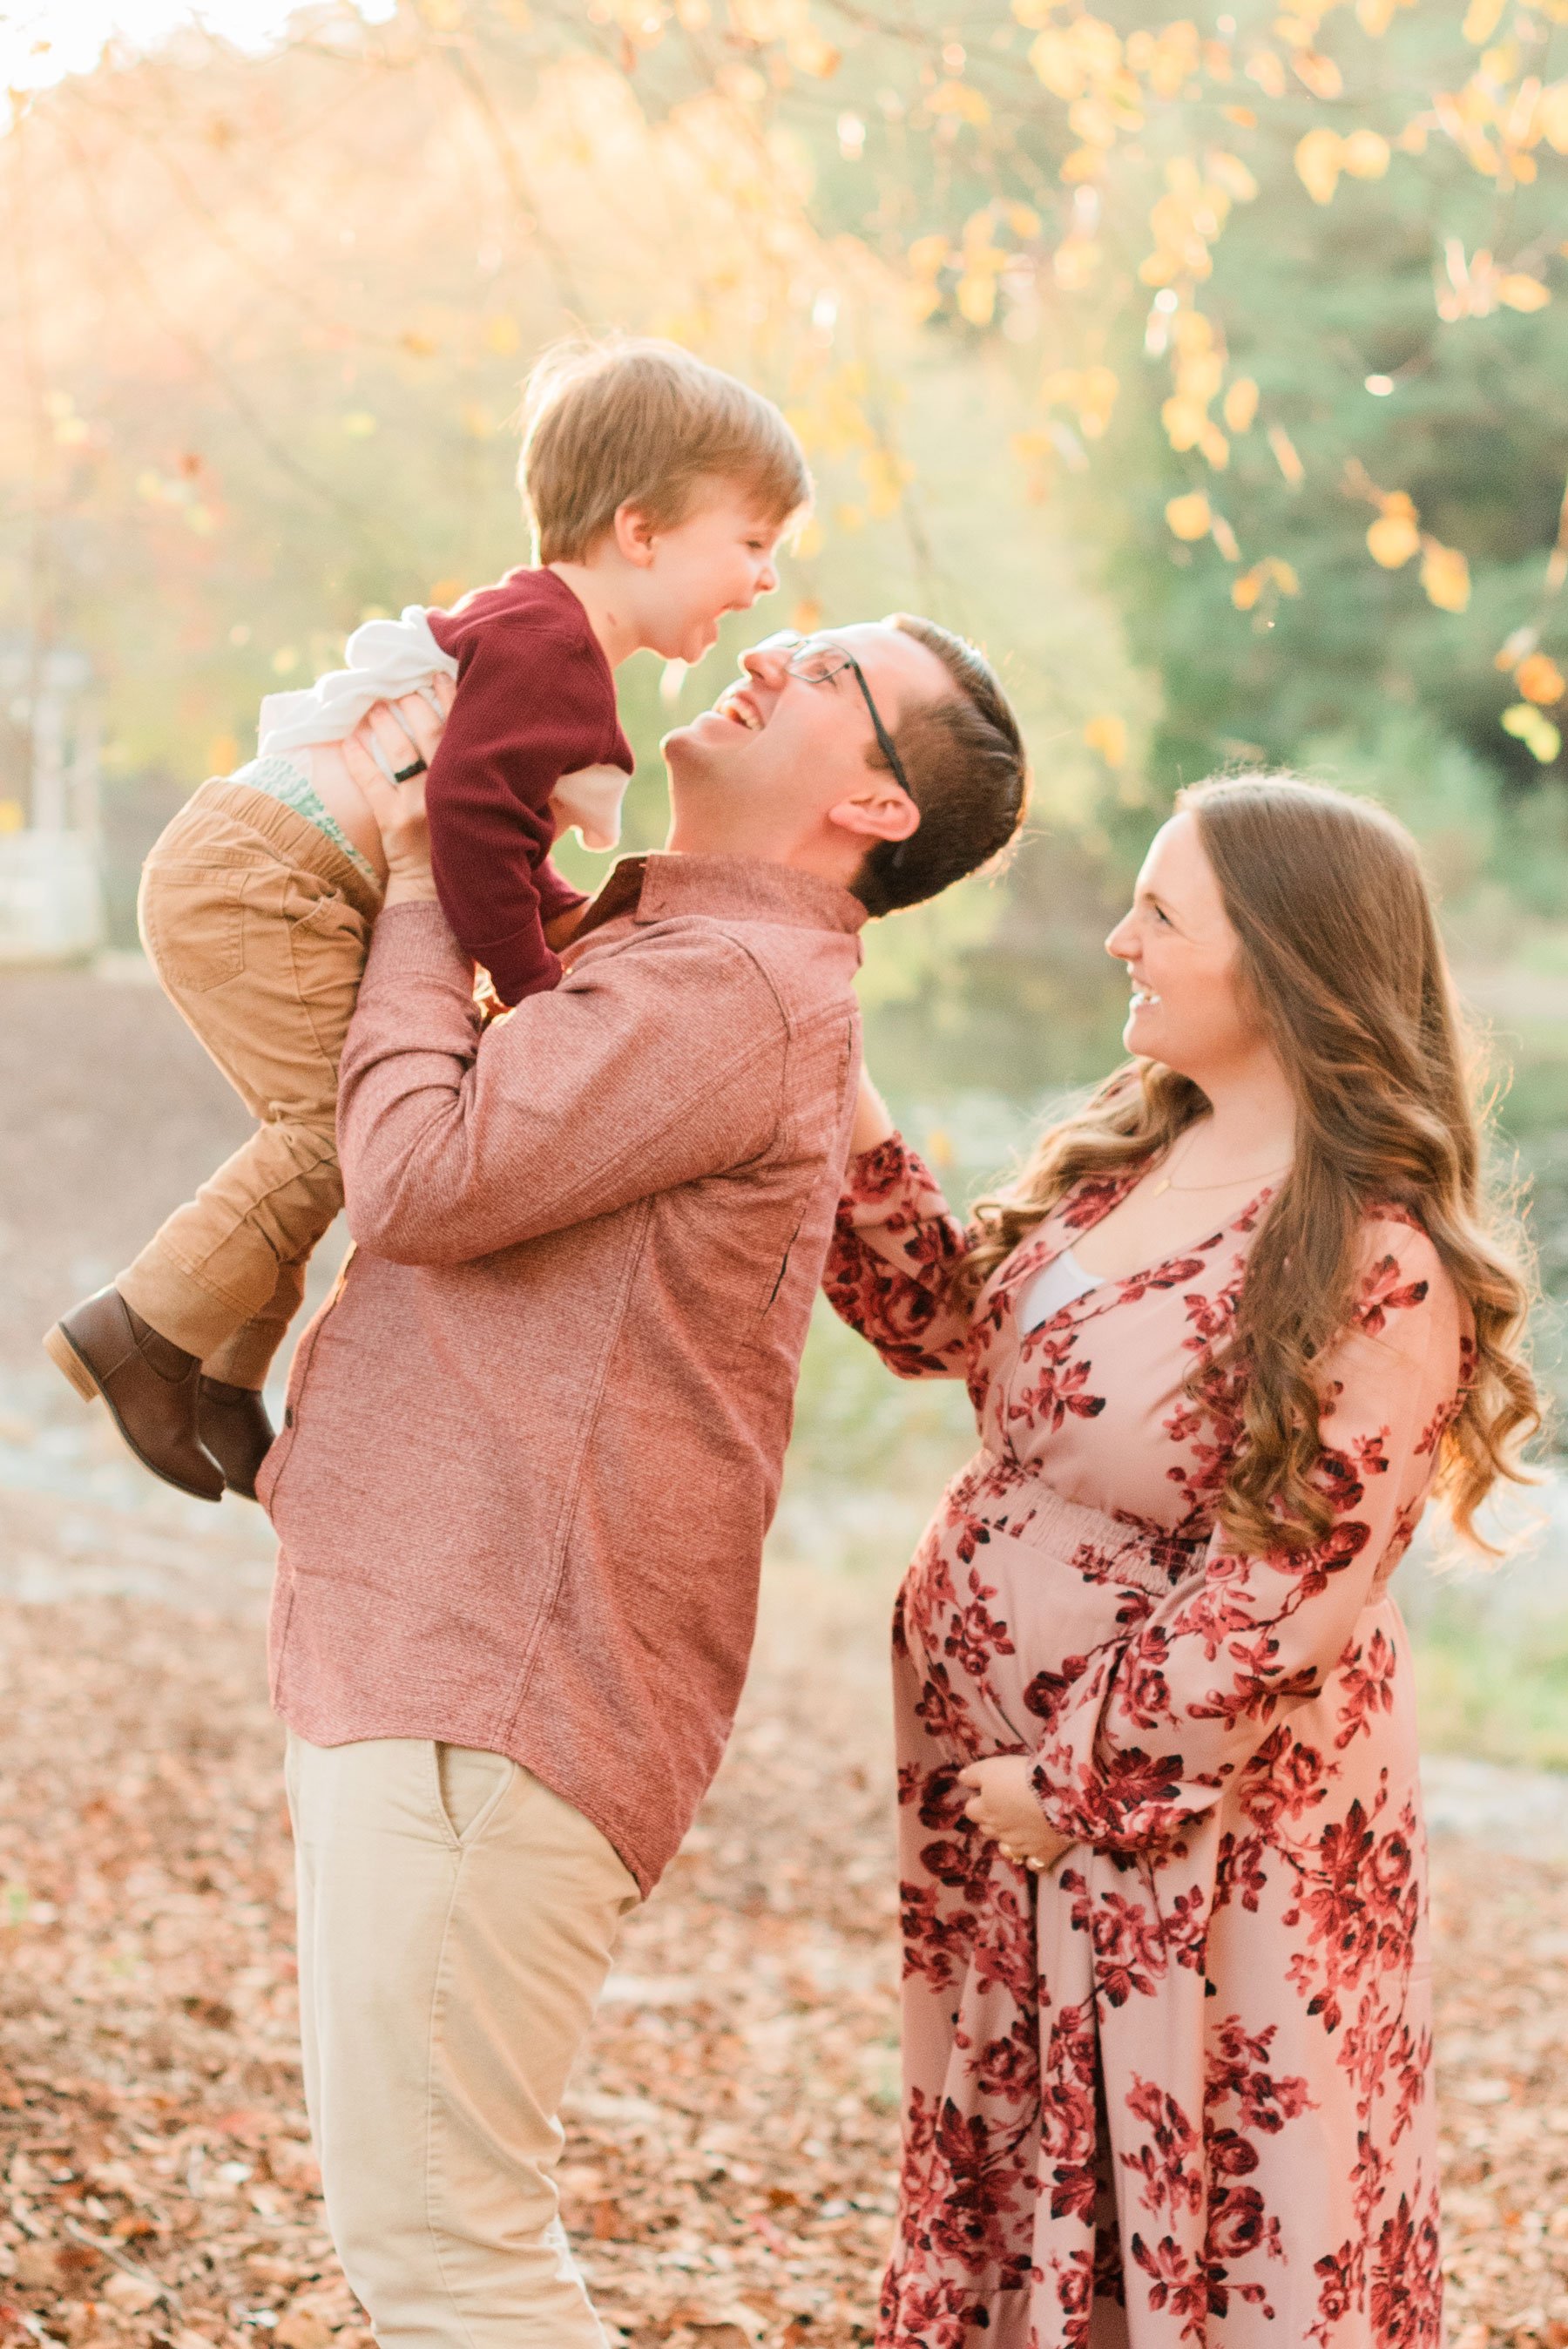  A father lifts his young son while his pregnant wife stands behind smiling up and him during their family maternity photo shoot. Georgia Maternity photos&nbsp; #familymaterintyphotos #pregnacyphotoshoot #familyof4 #peachtreecity #atlantafamilyphotog